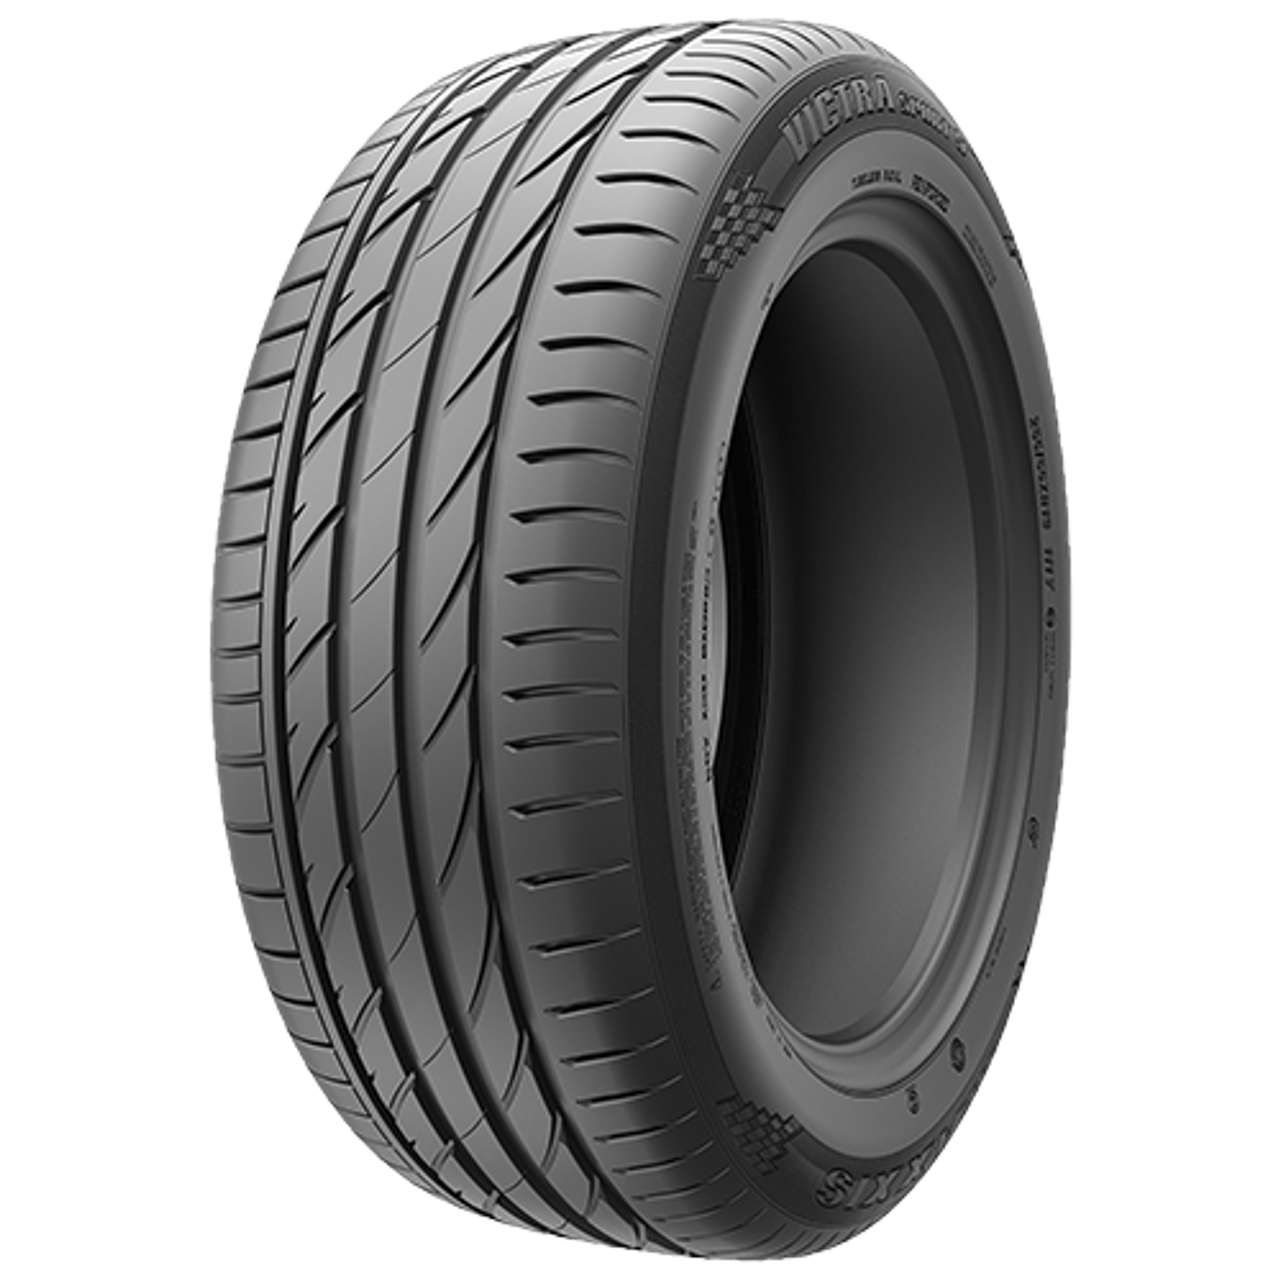 MAXXIS VICTRA SPORT 5 (VS5) SUV 215/65R17 103V BSW XL